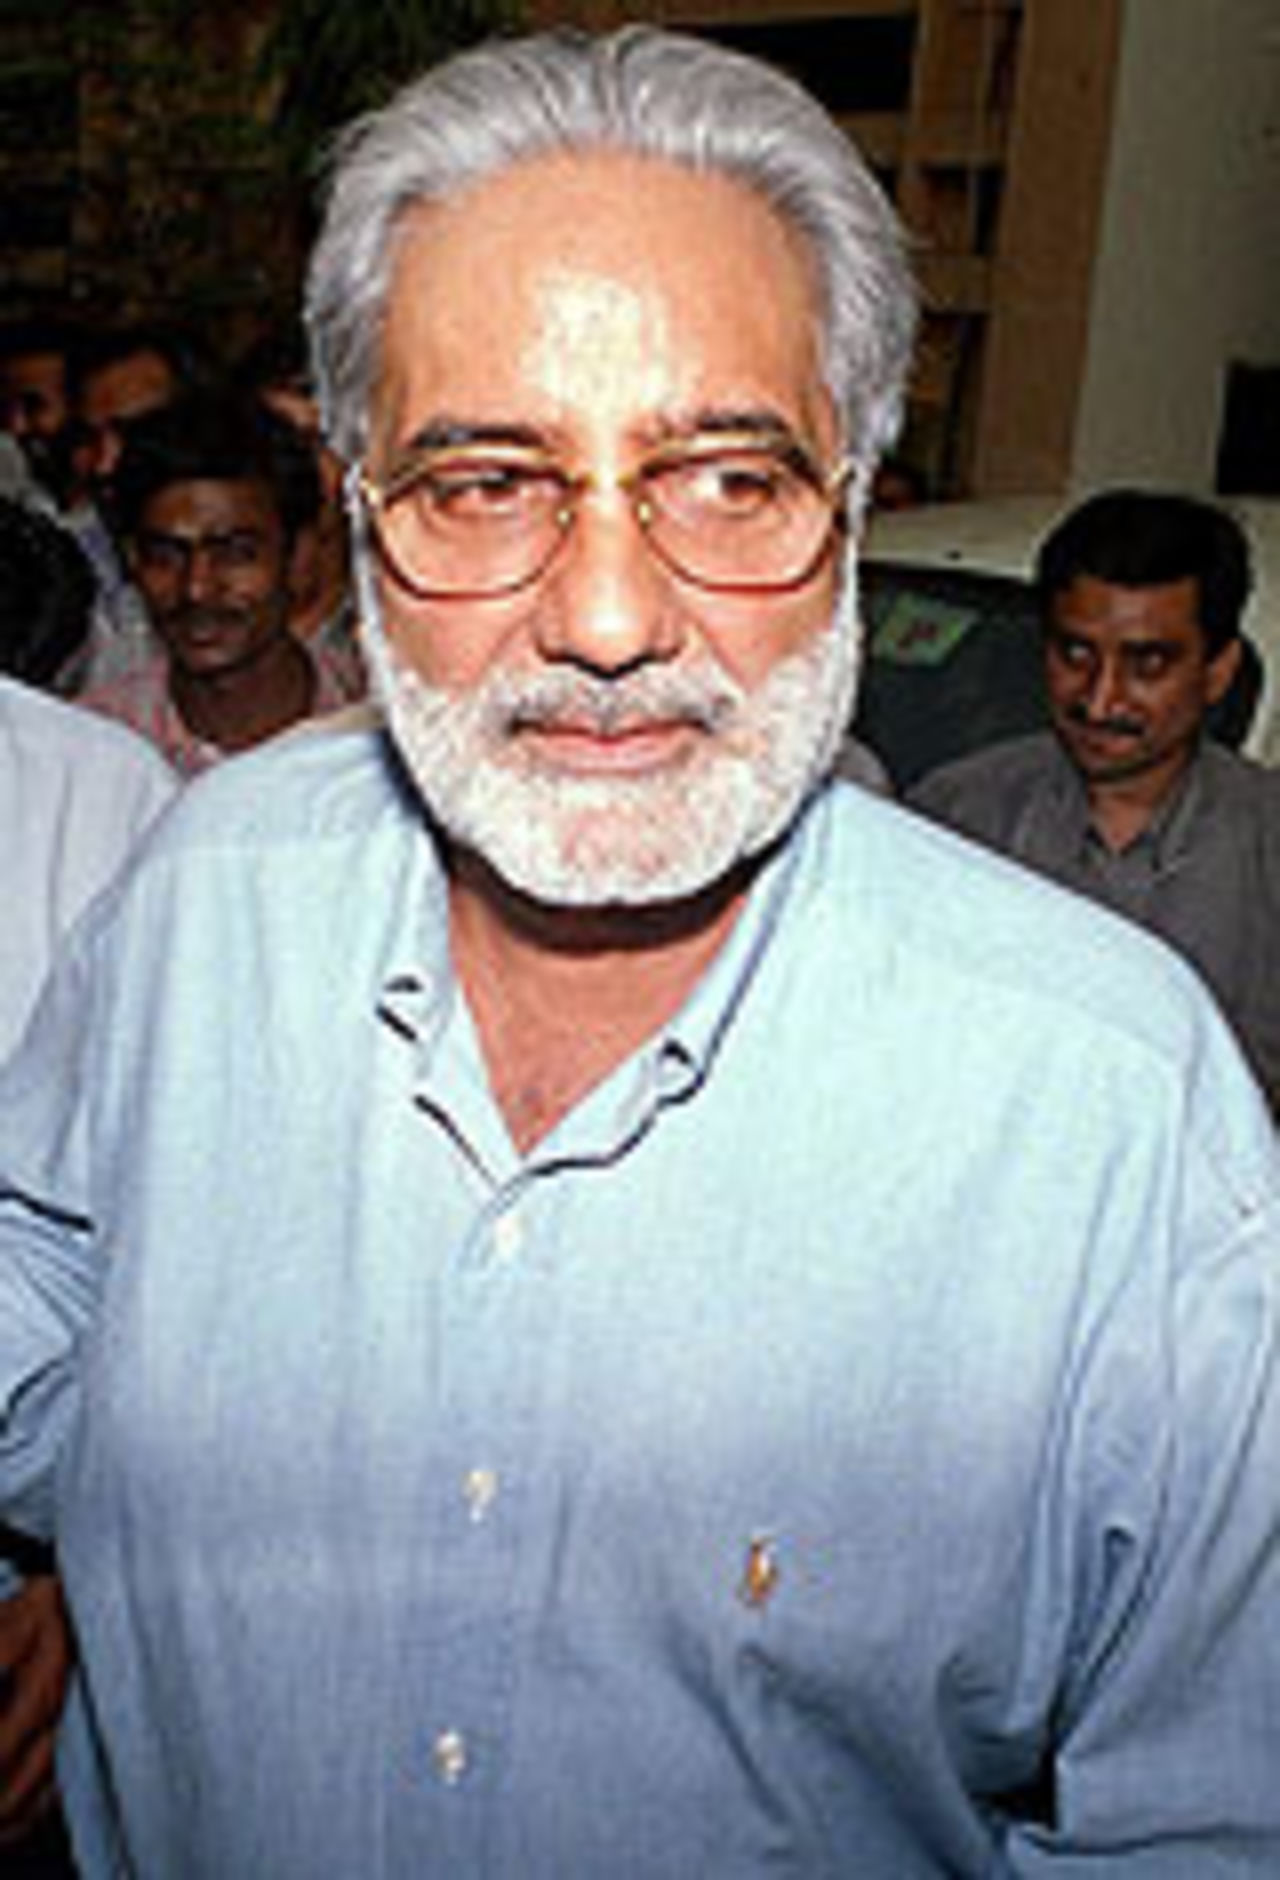 IS Bindra leaves the Central Bureau of Investigation office, New Delhi, May 15, 2005